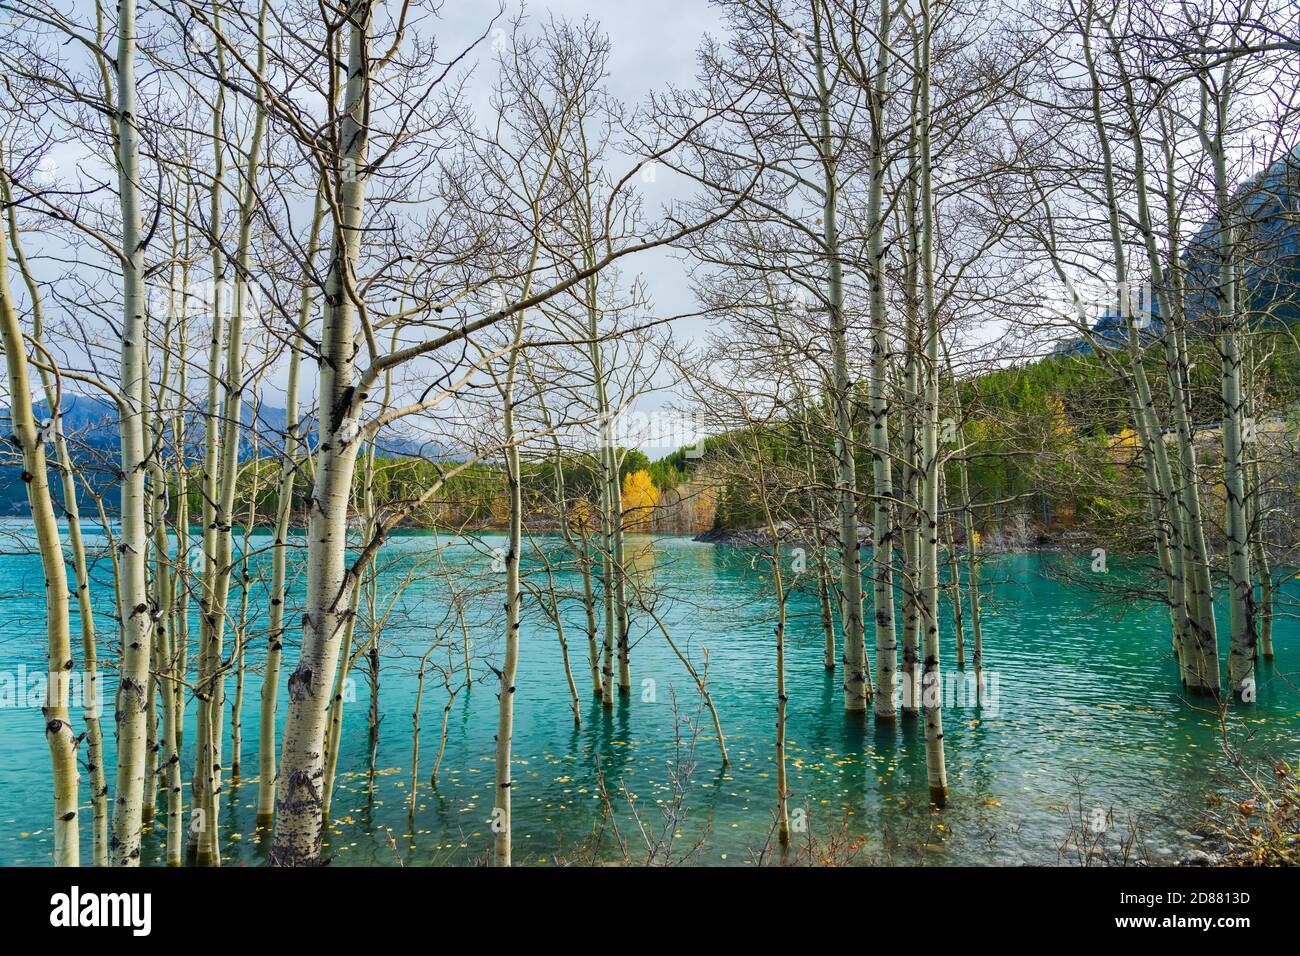 Dried Birch Branches and fallen golden foliage on the emerald green water surface. Scenery view at Abraham lake shore in autumn season. Jasper. Stock Photo